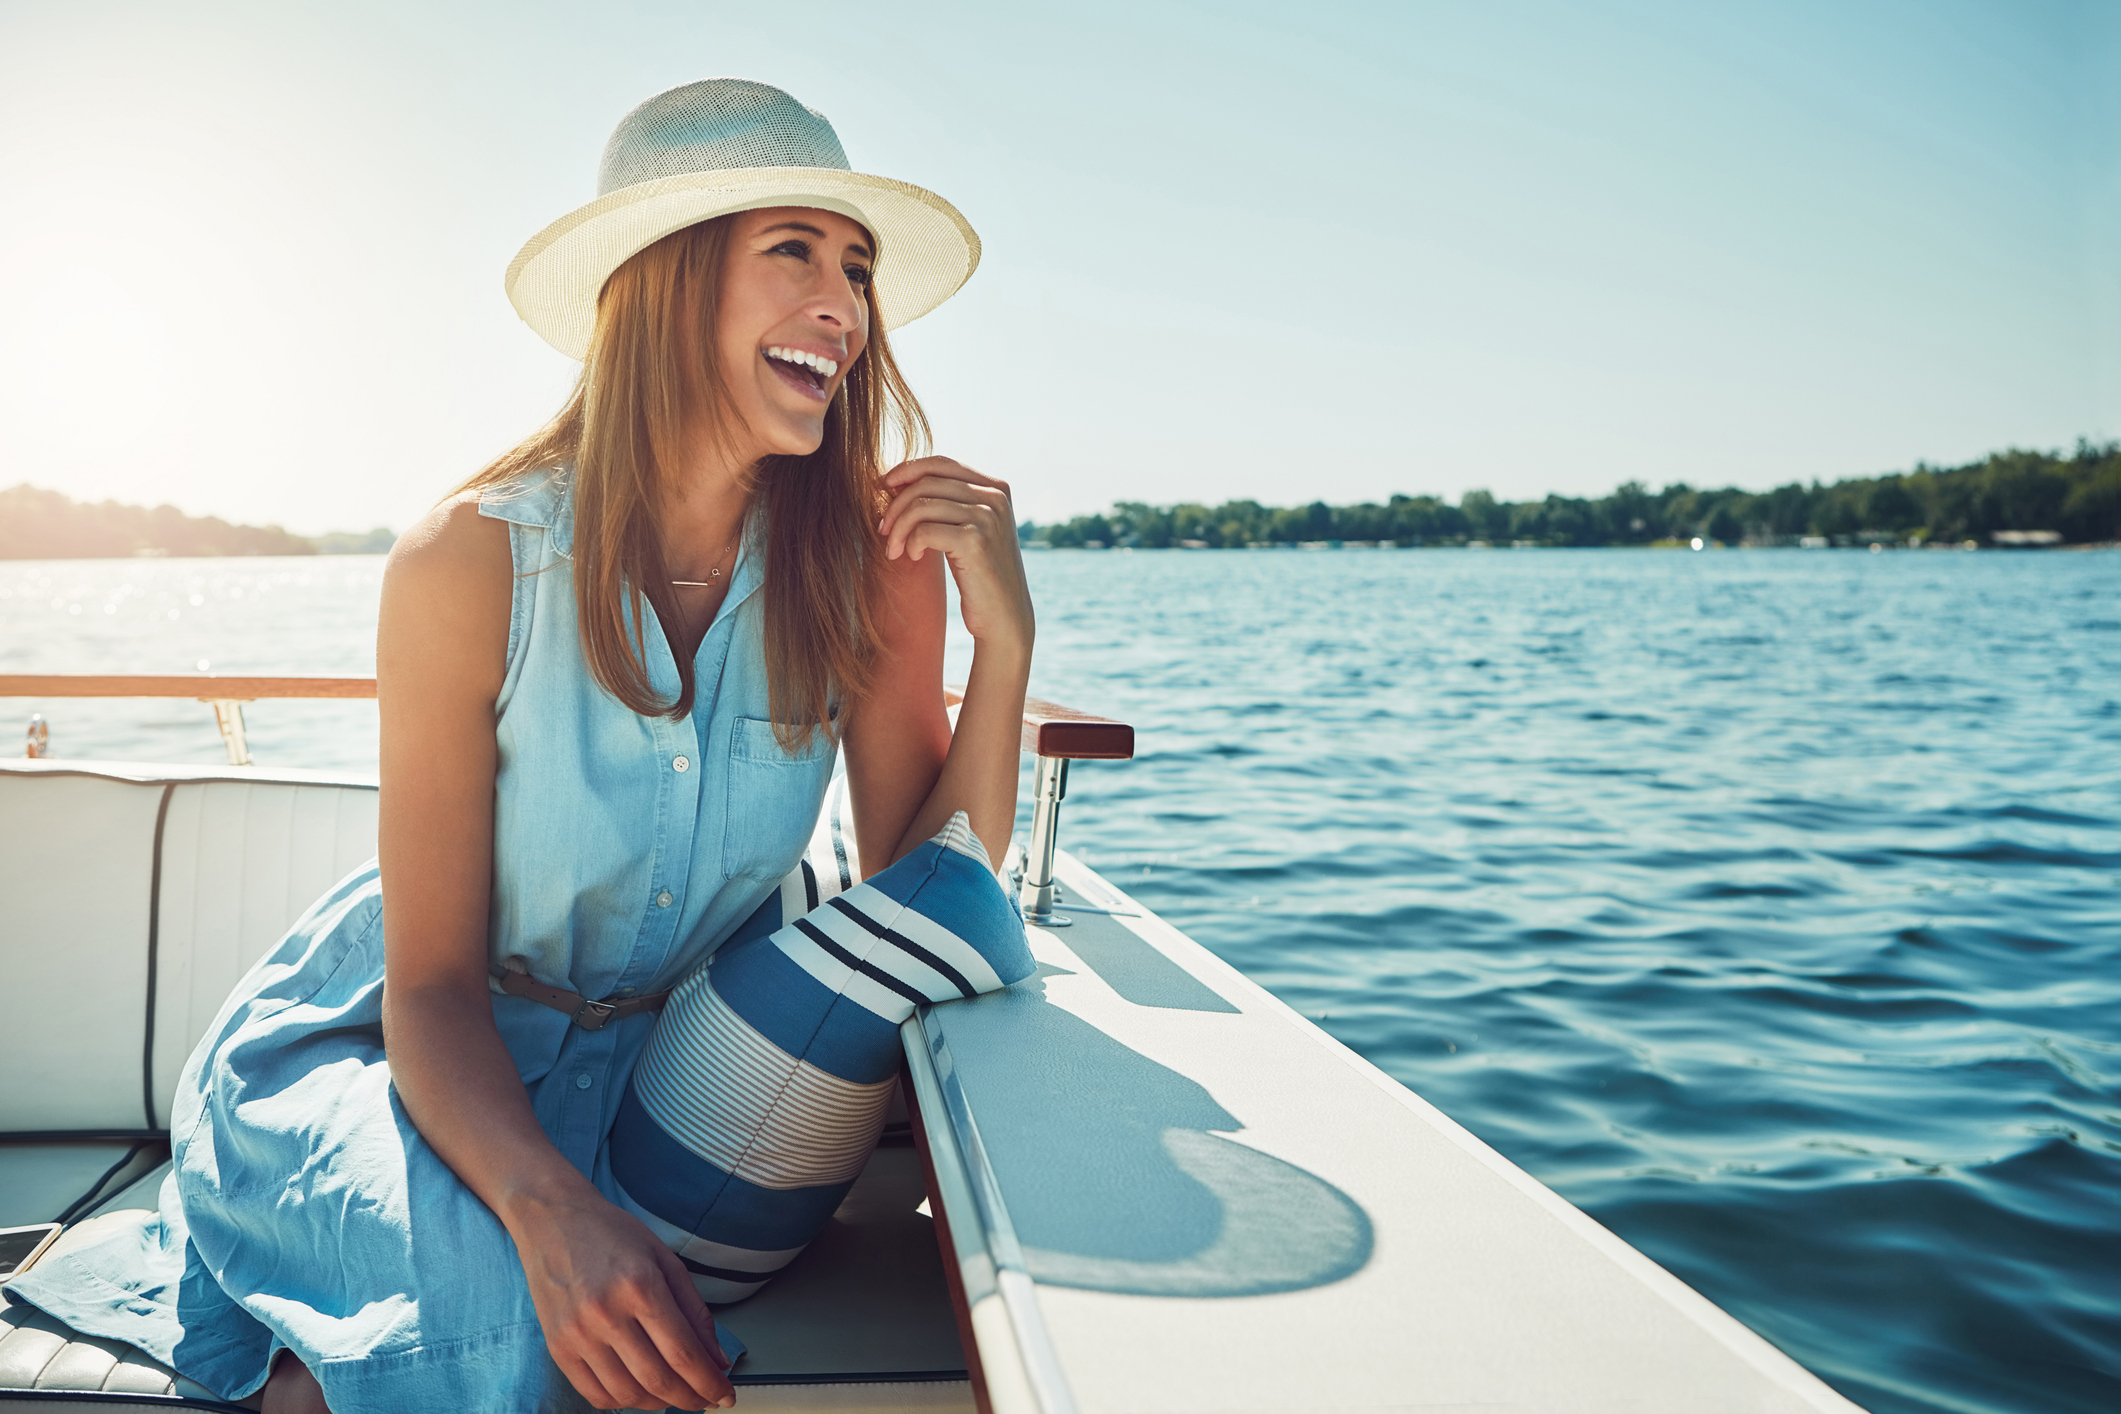 6 Boating Hats to Buy for a Day on the Water